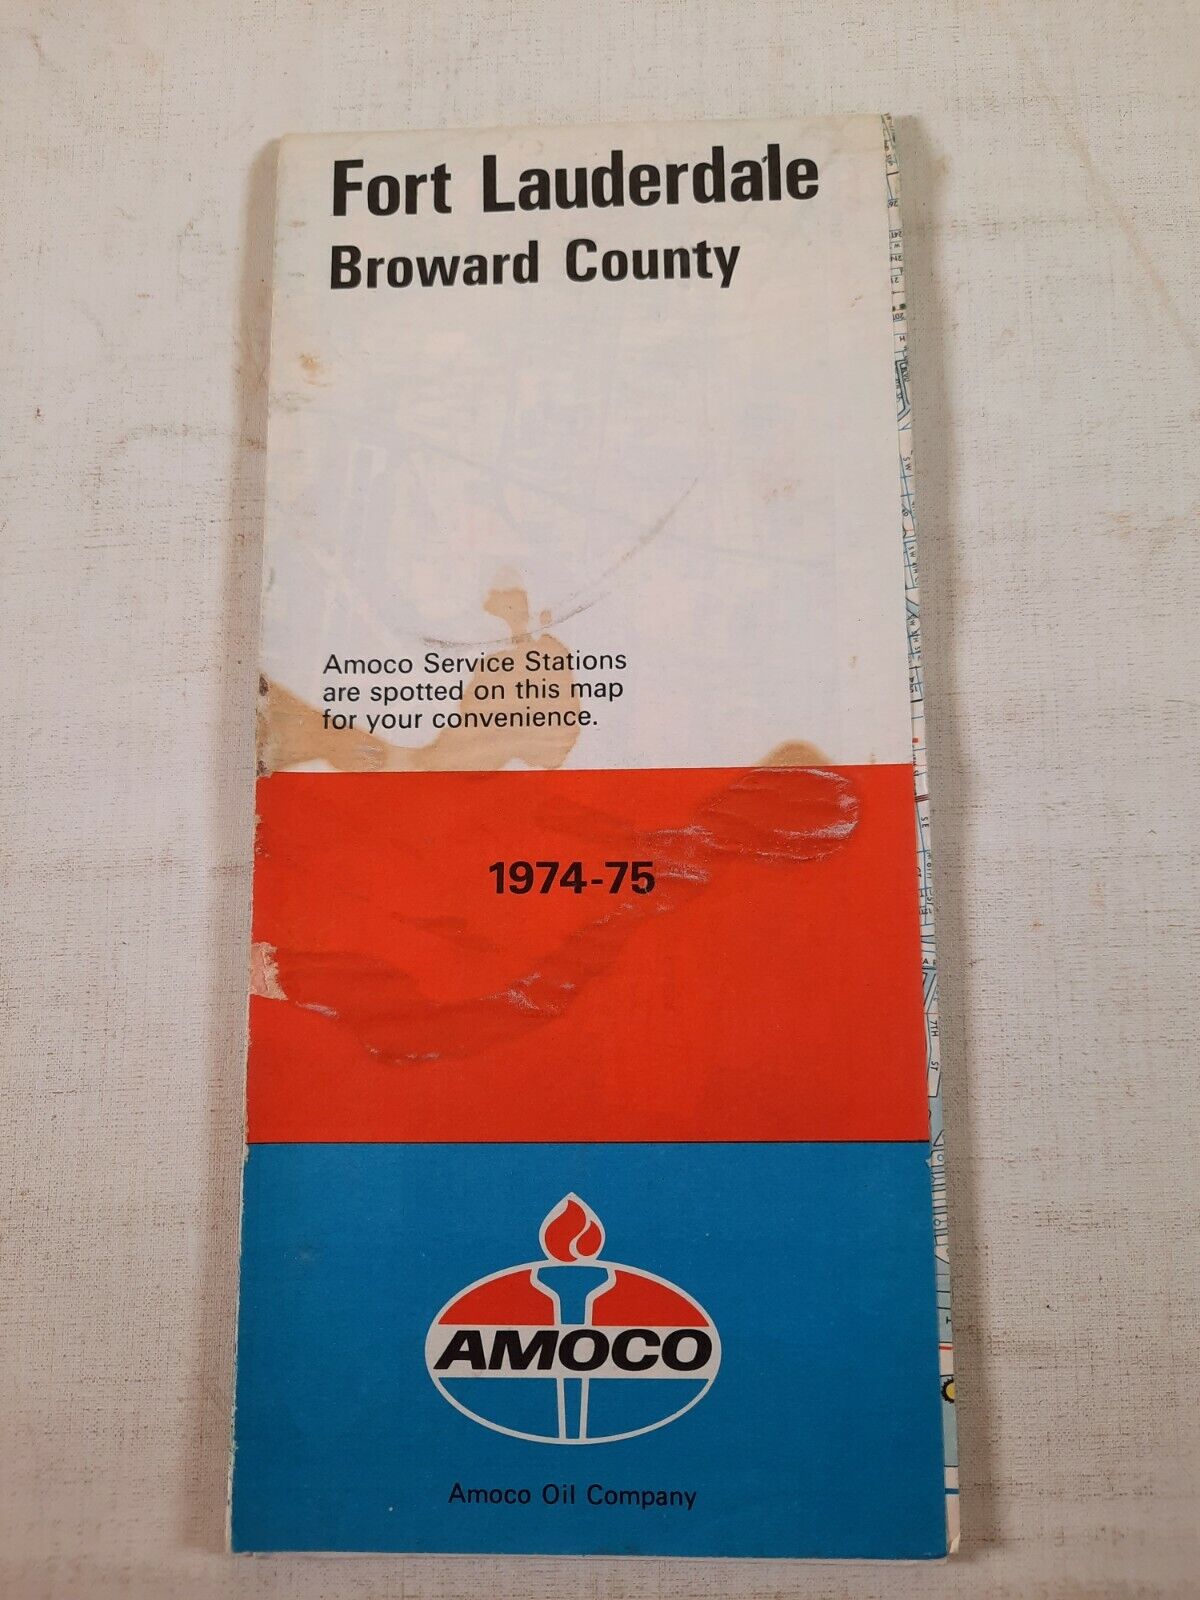 1975 1974 Vtg Amoco road map and directory of Fort Lauderdale Broward County 